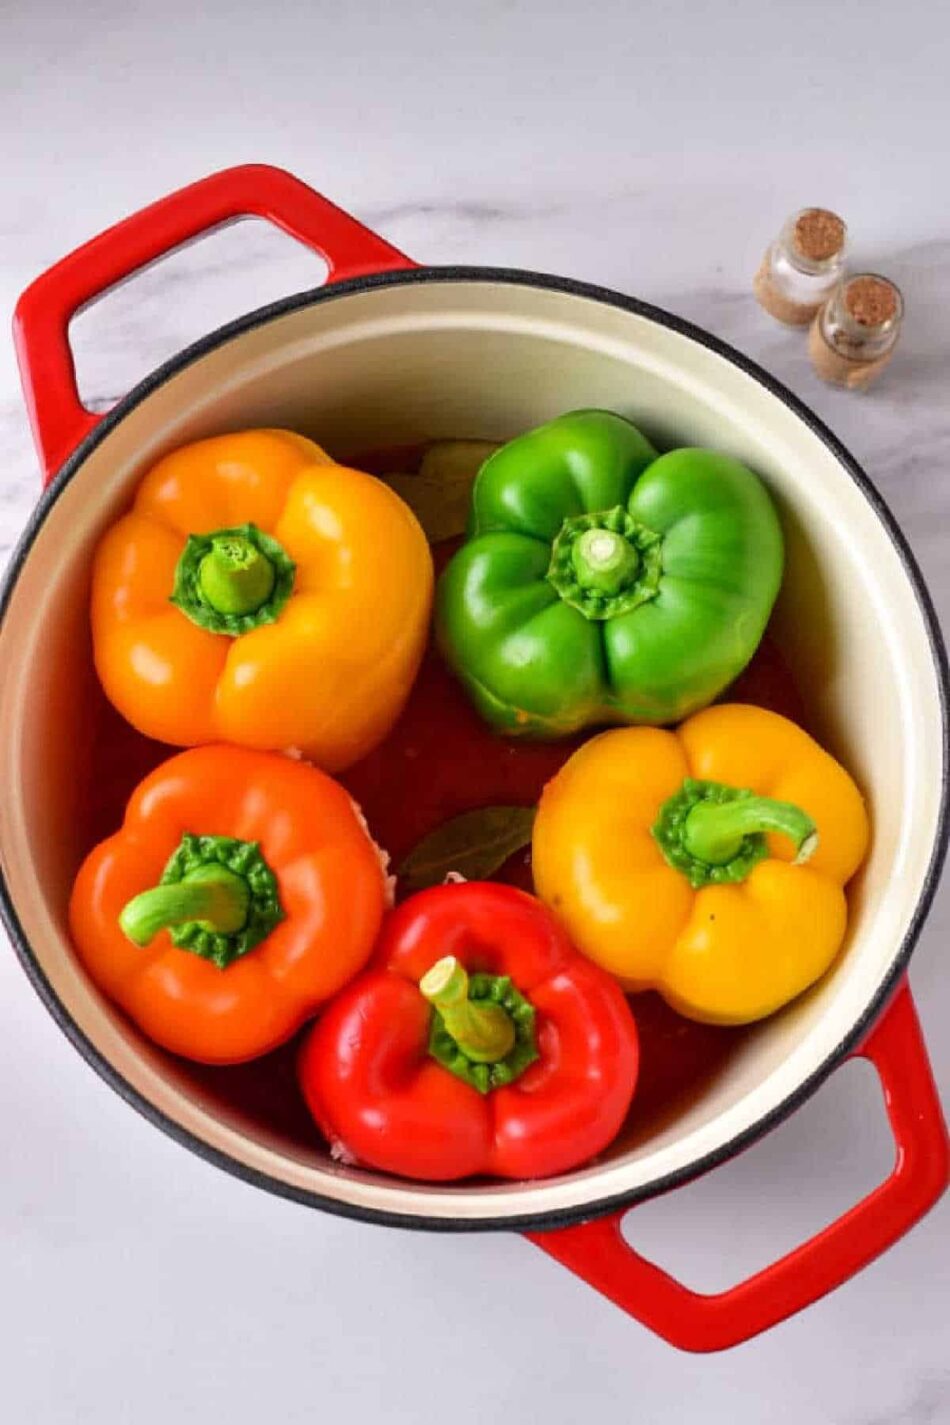 How Long to Cook Stuffed Peppers